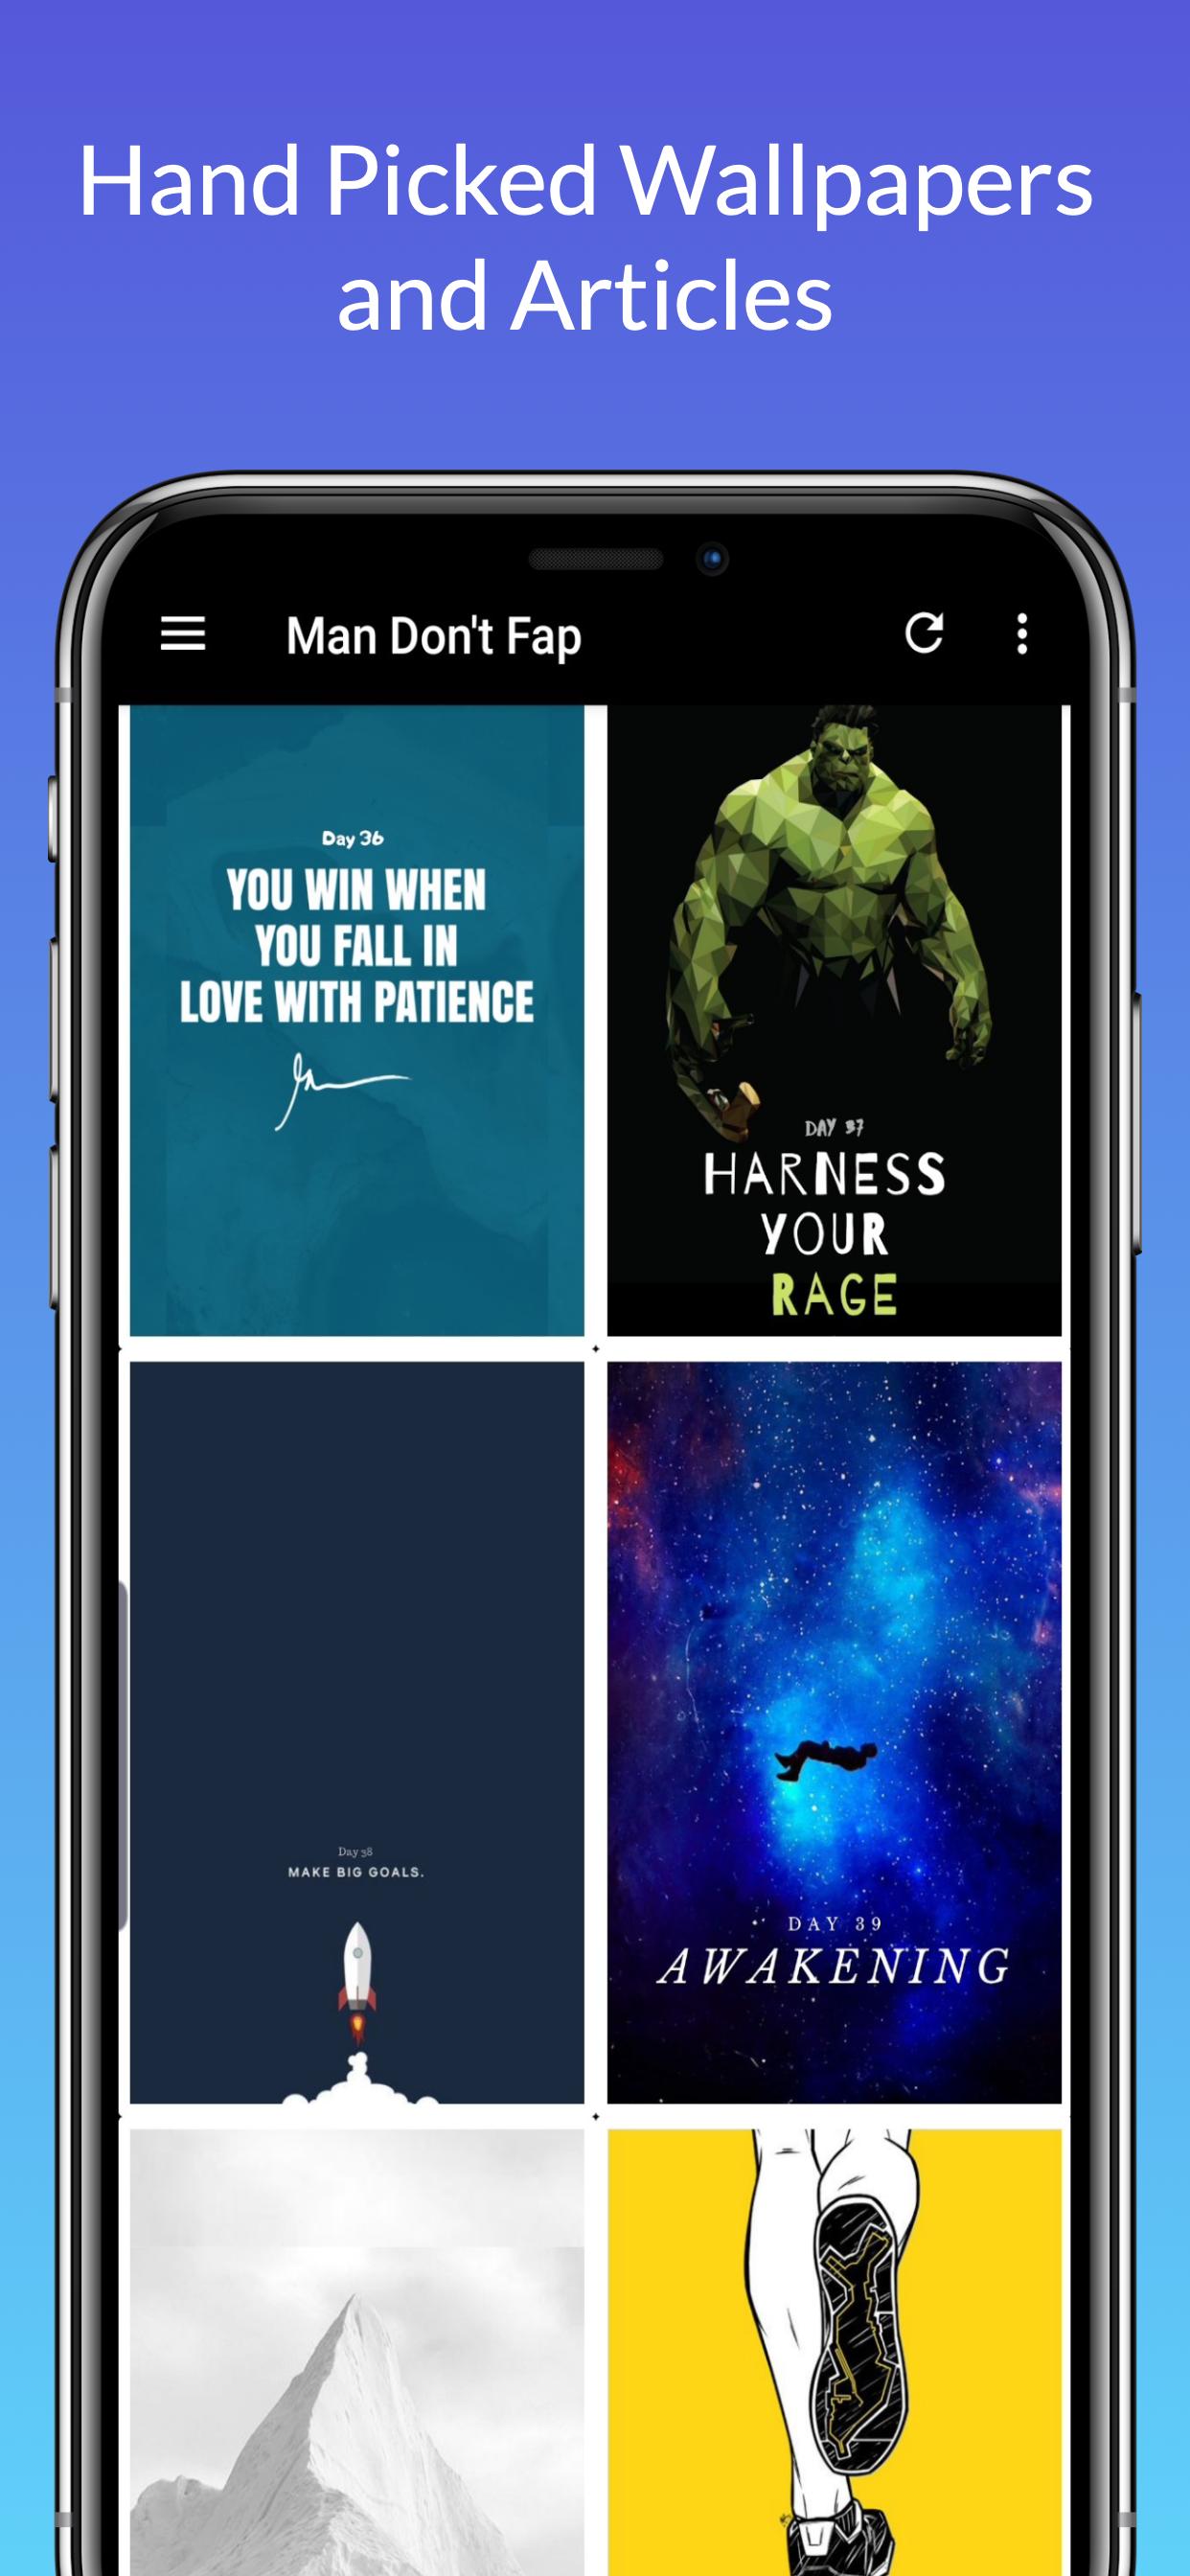 Man Don't Fap : Streak Based Wallpapers for Android - APK Download